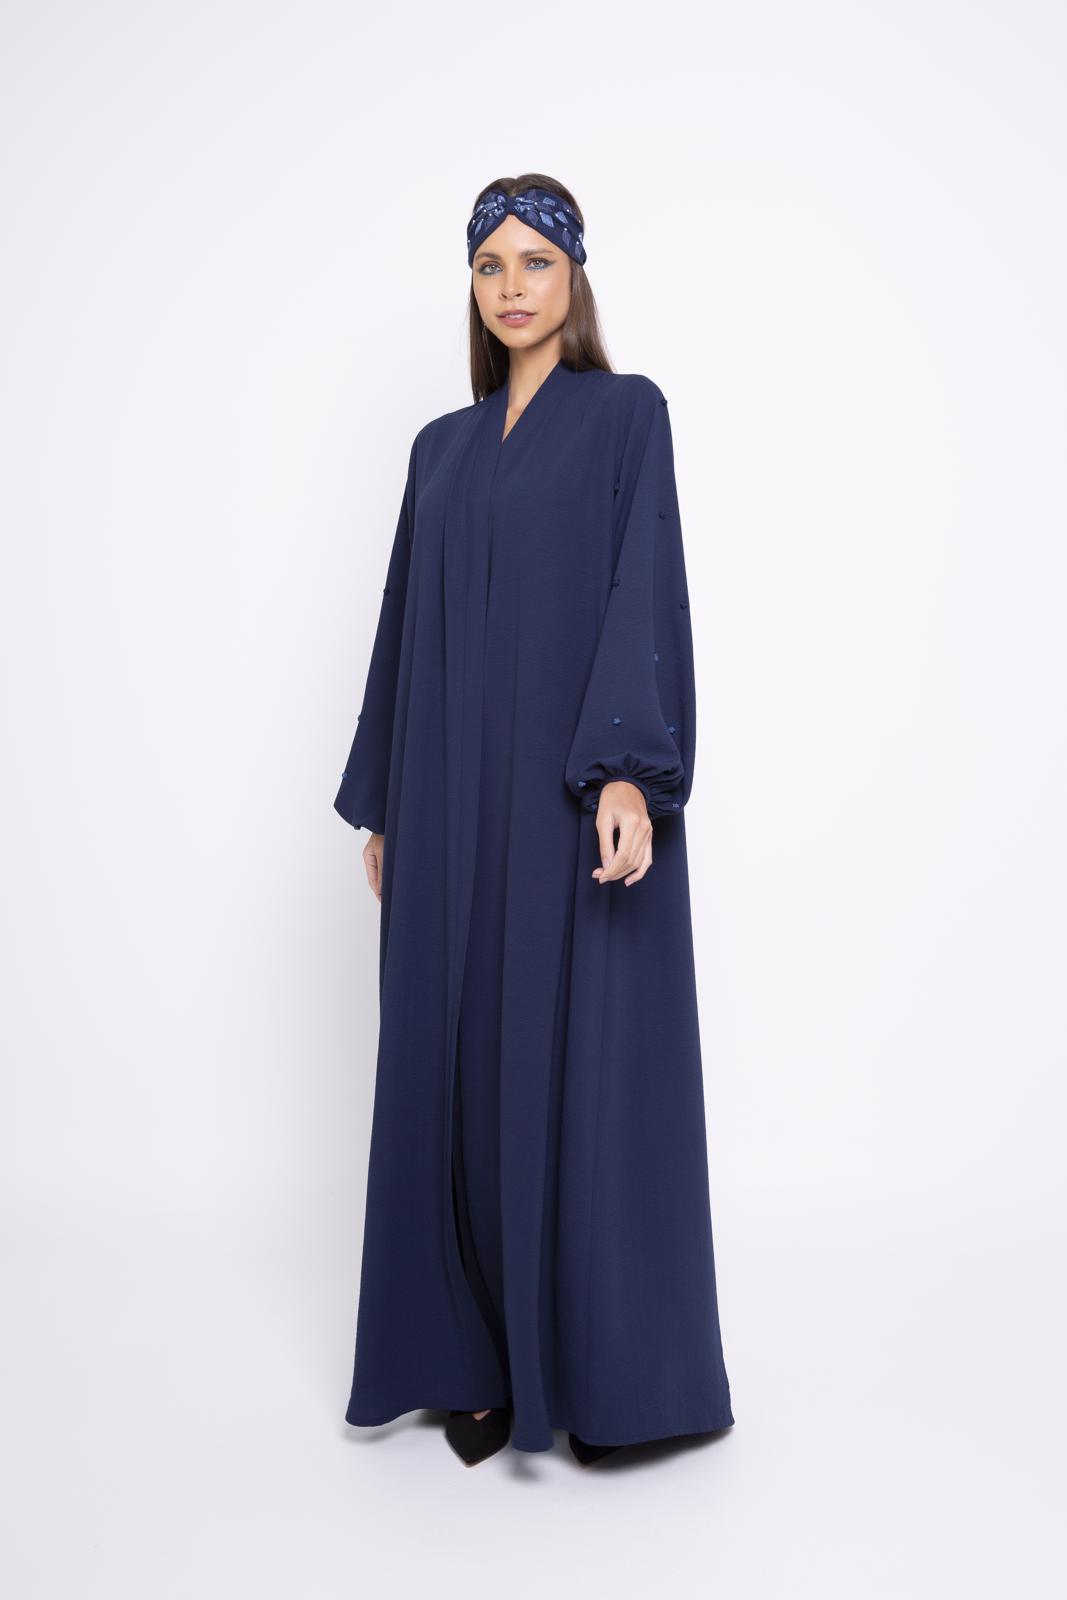 Linen abaya with puffy cuff sleeves